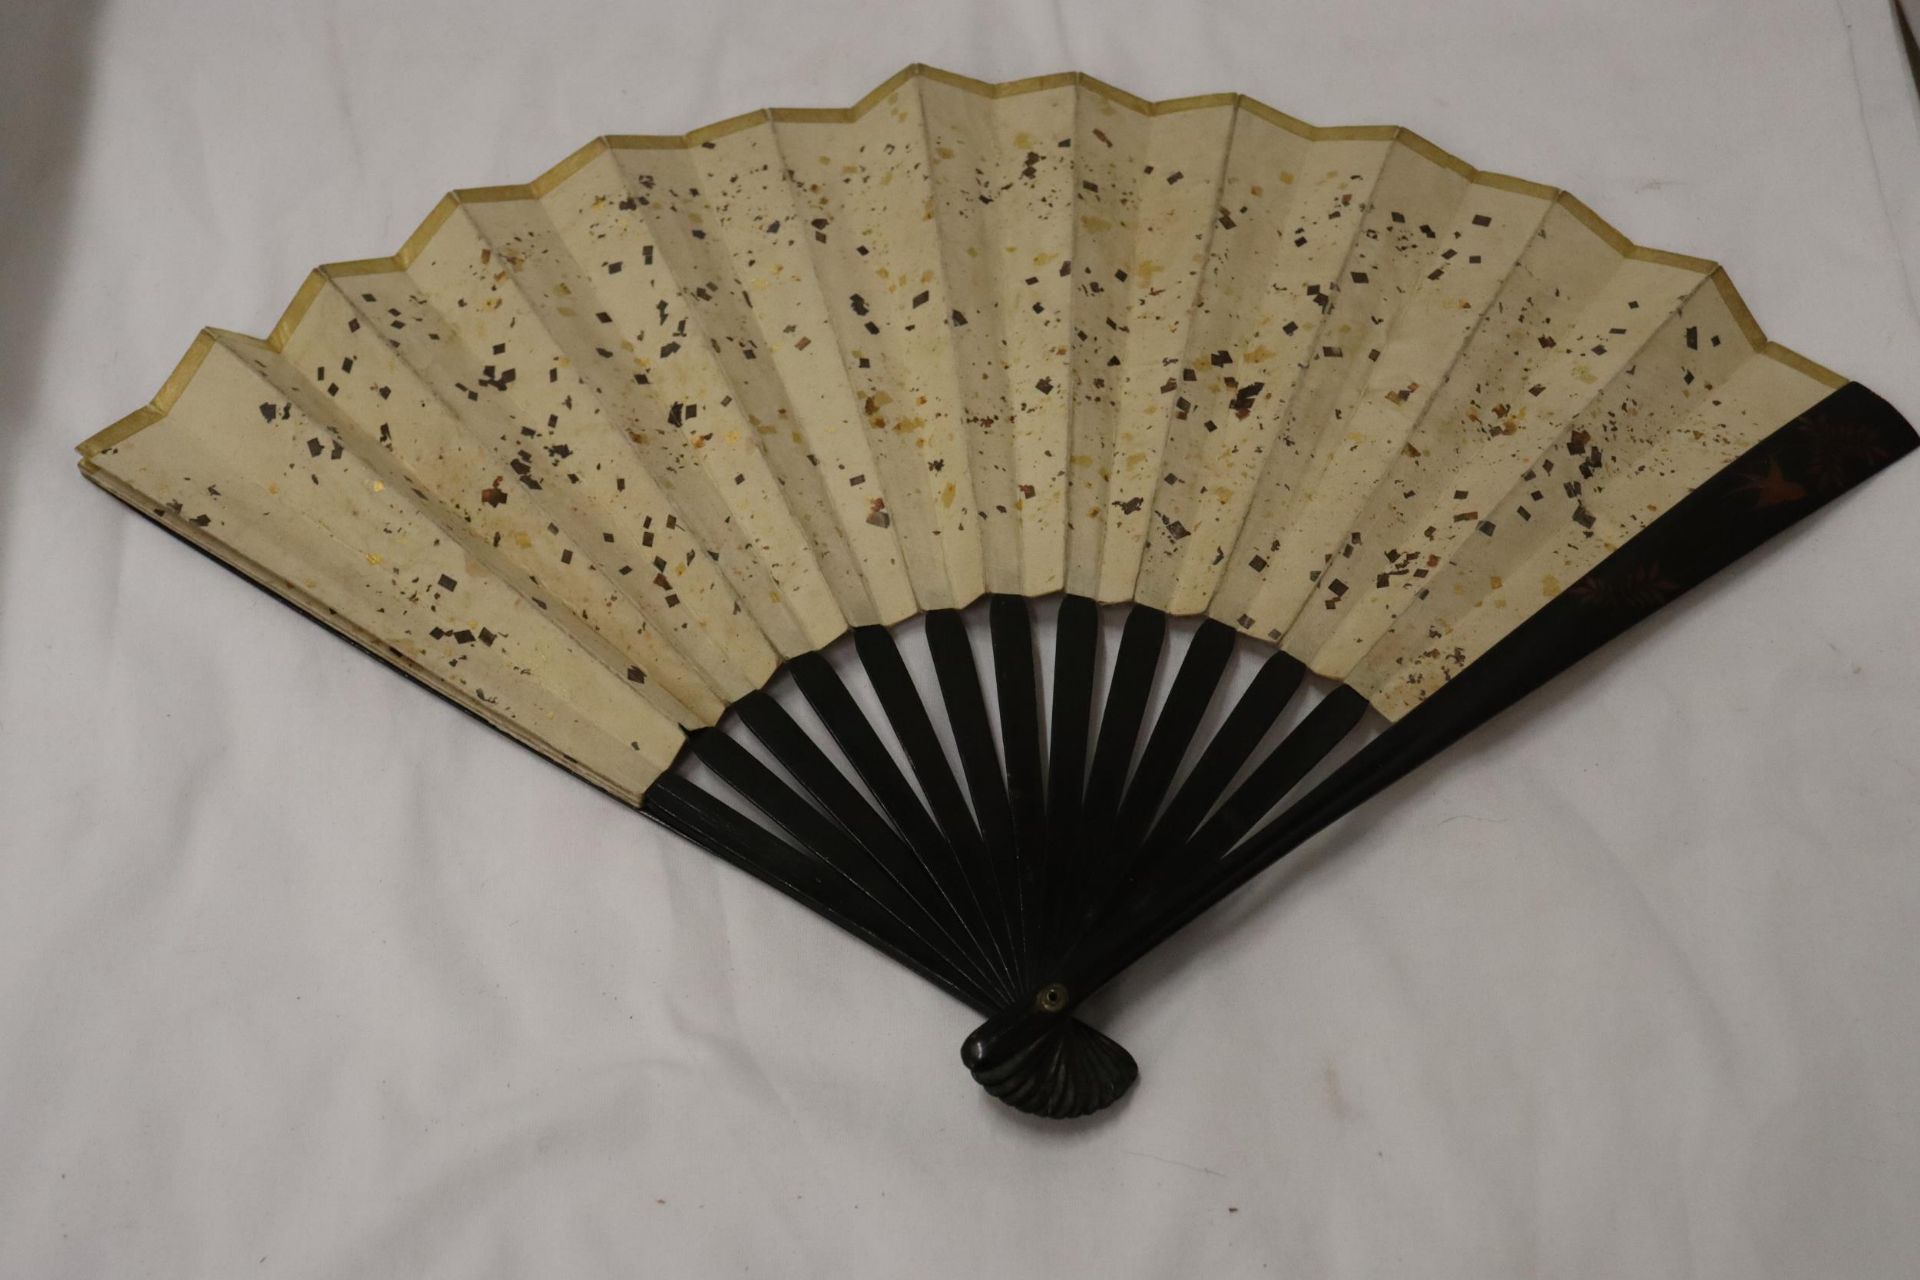 A CHINESE FAN WITH EMBROIDERED FLORAL DECORATION - Image 5 of 6